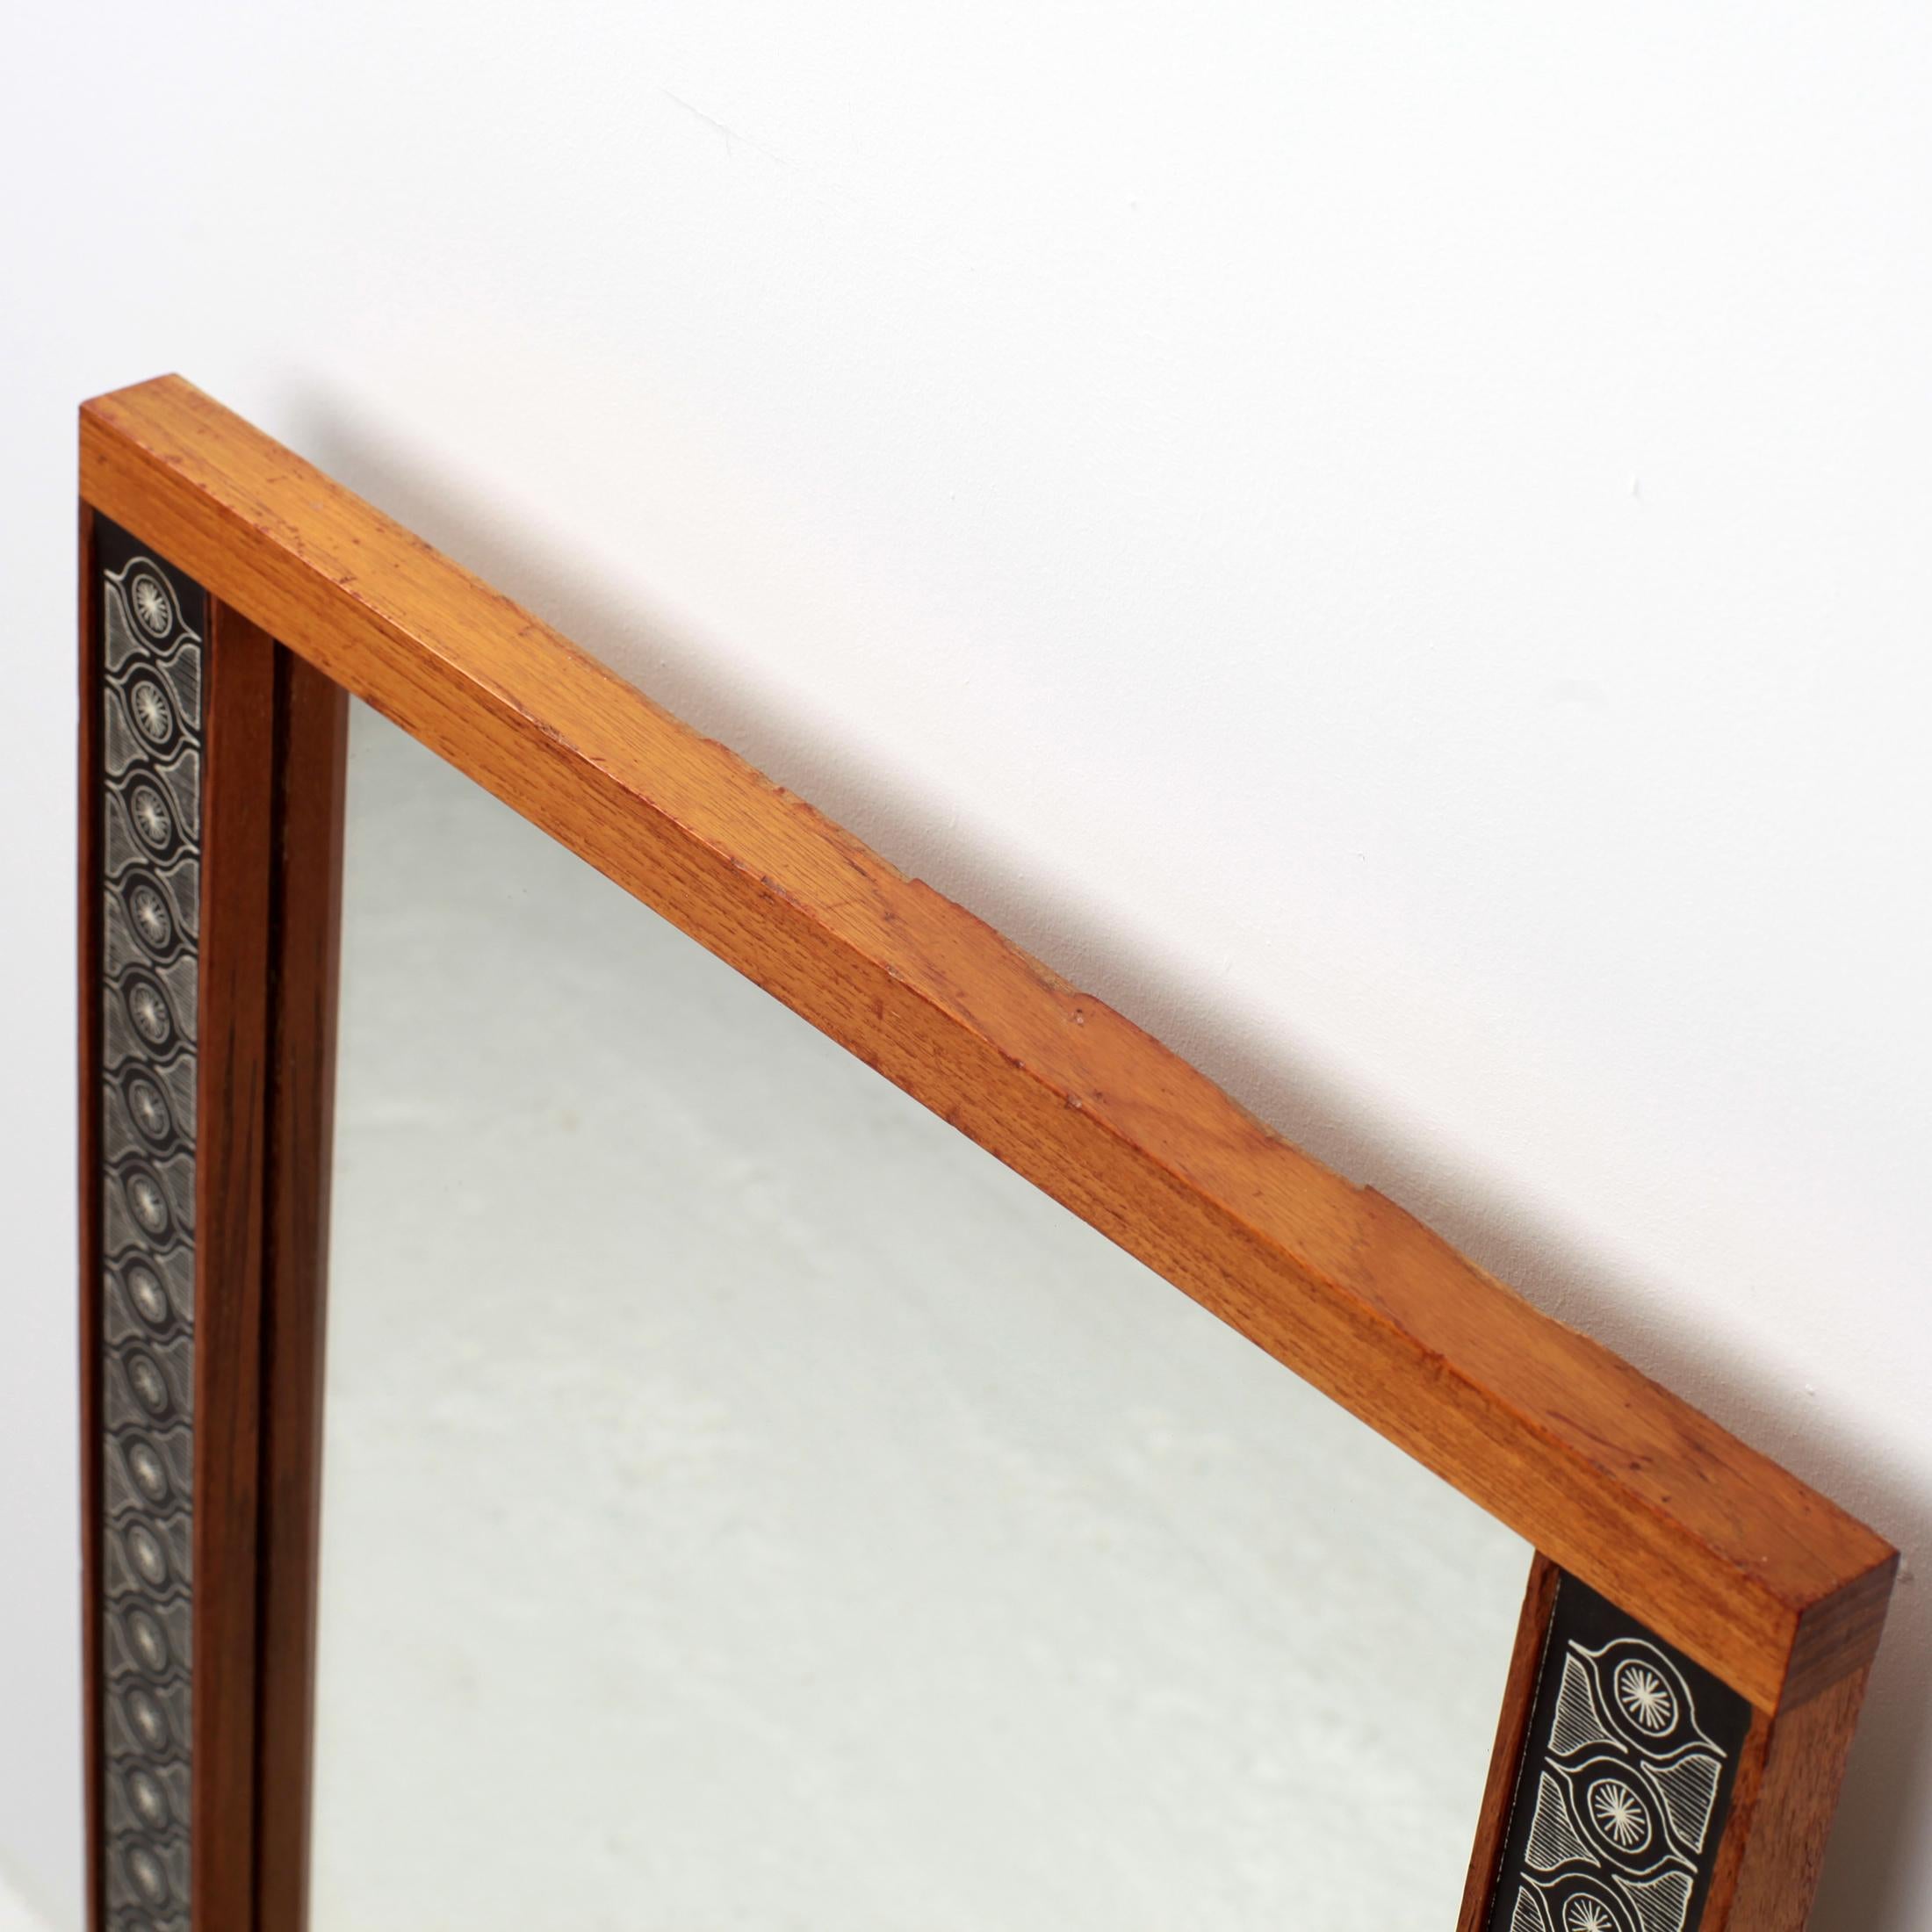 Rare and beautiful mirror by Hans-Agne Jakobsson for Markaryd in Ahus Sweden, circa 1950.
The frame is in solid teak with black and white paper decor.
Beautiful patina.
Stamp on the back.